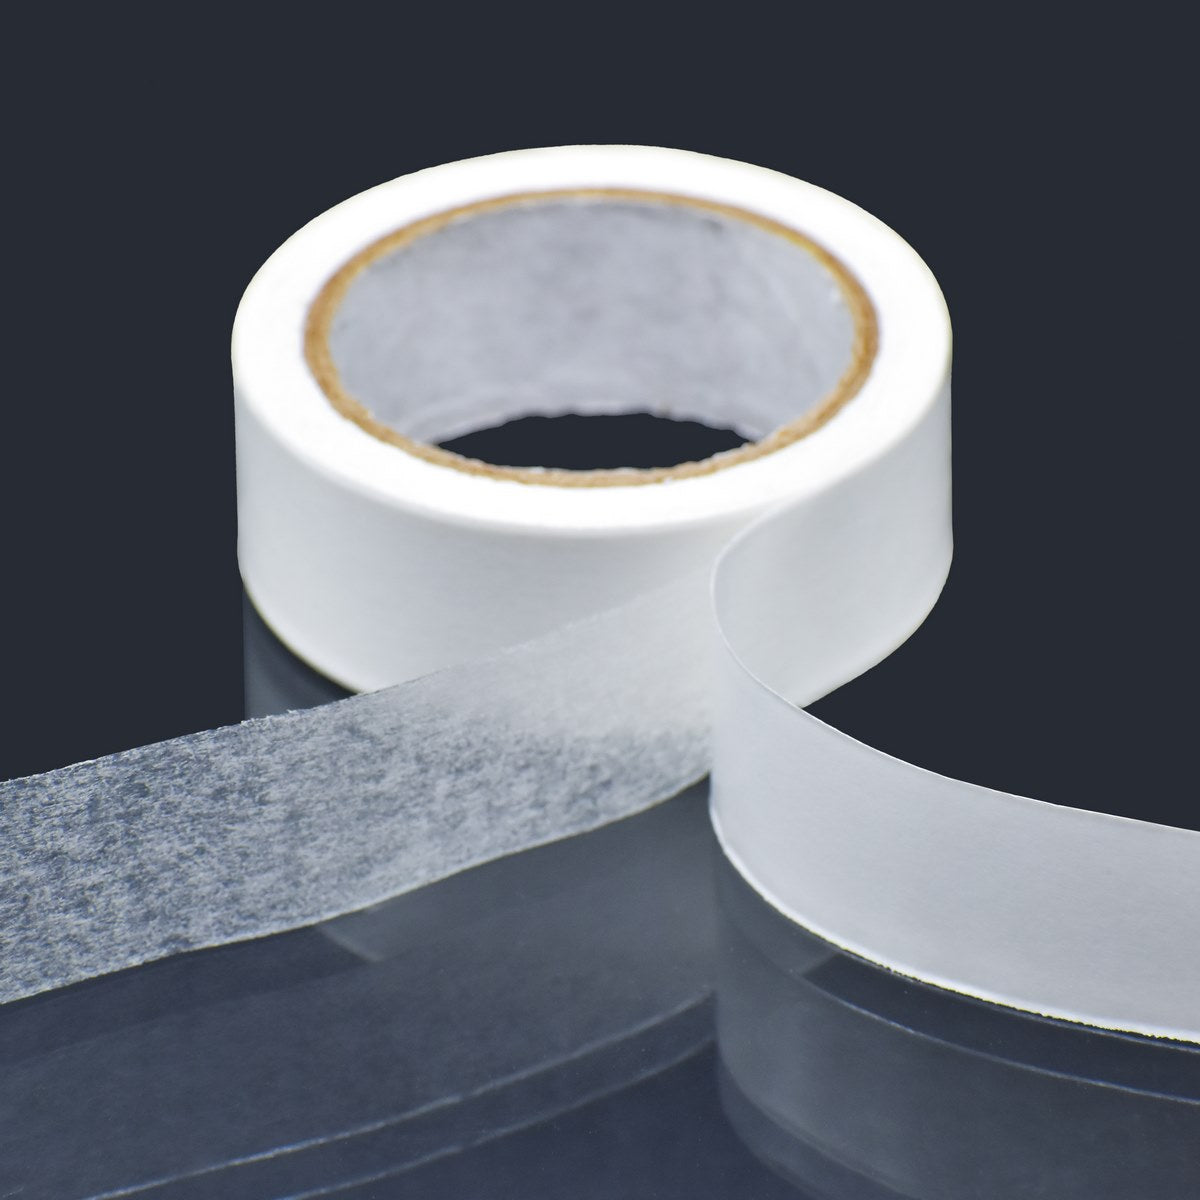 jags-mumbai Two way tape Double Sided Tissue Tape 5 M long 18MM wide